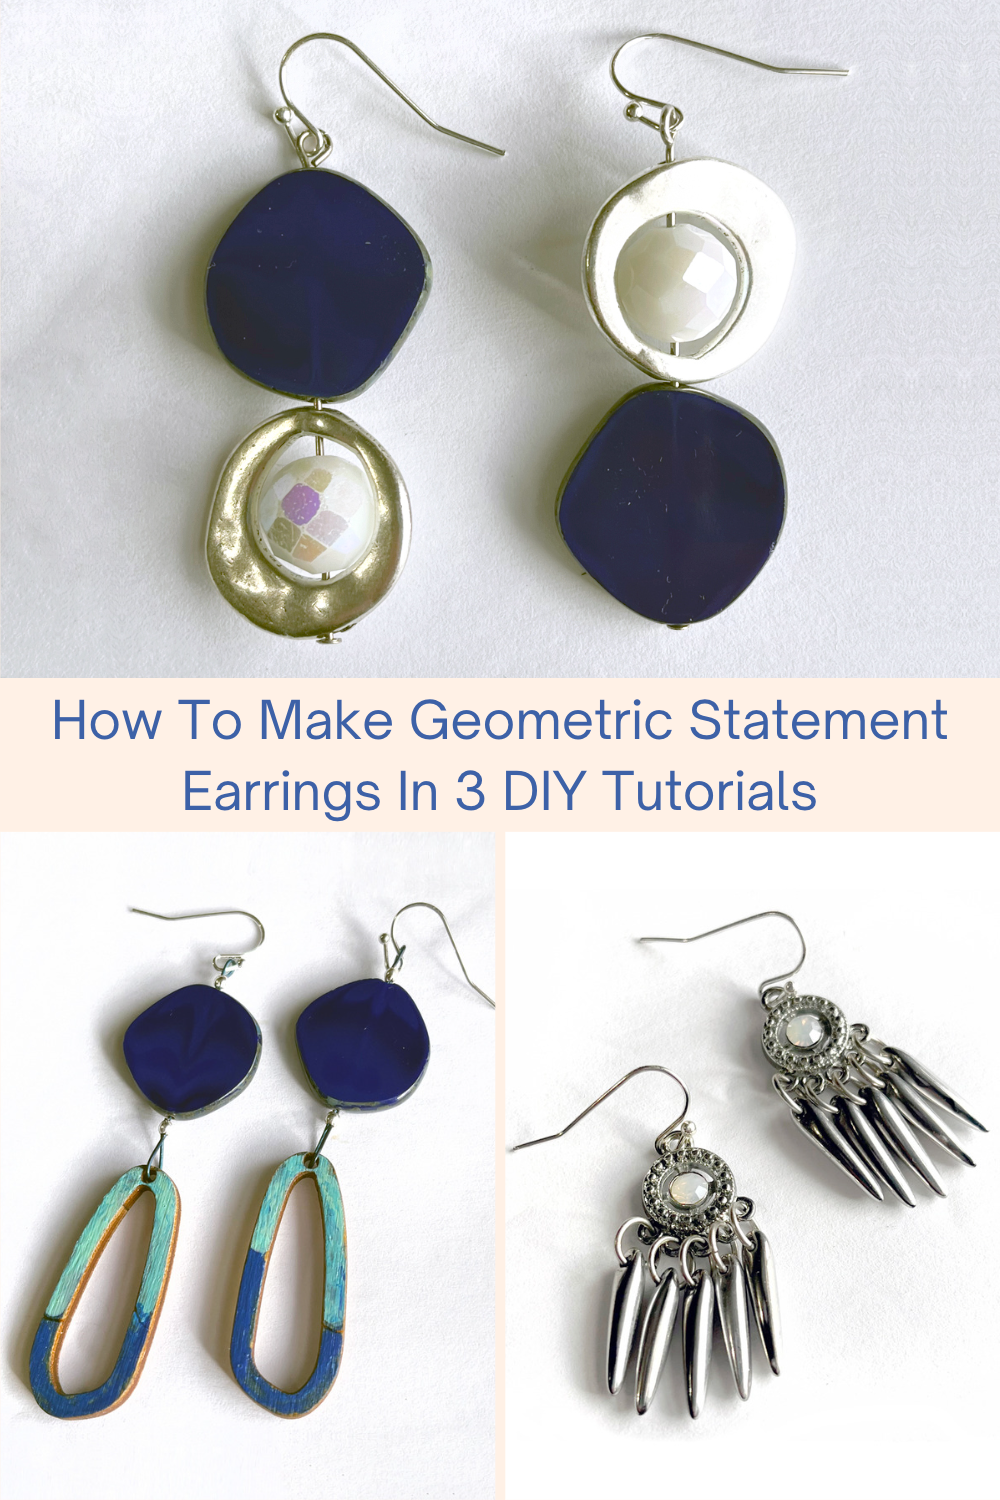 How To Make Geometric Statement Earrings In 3 DIY Tutorials Collage